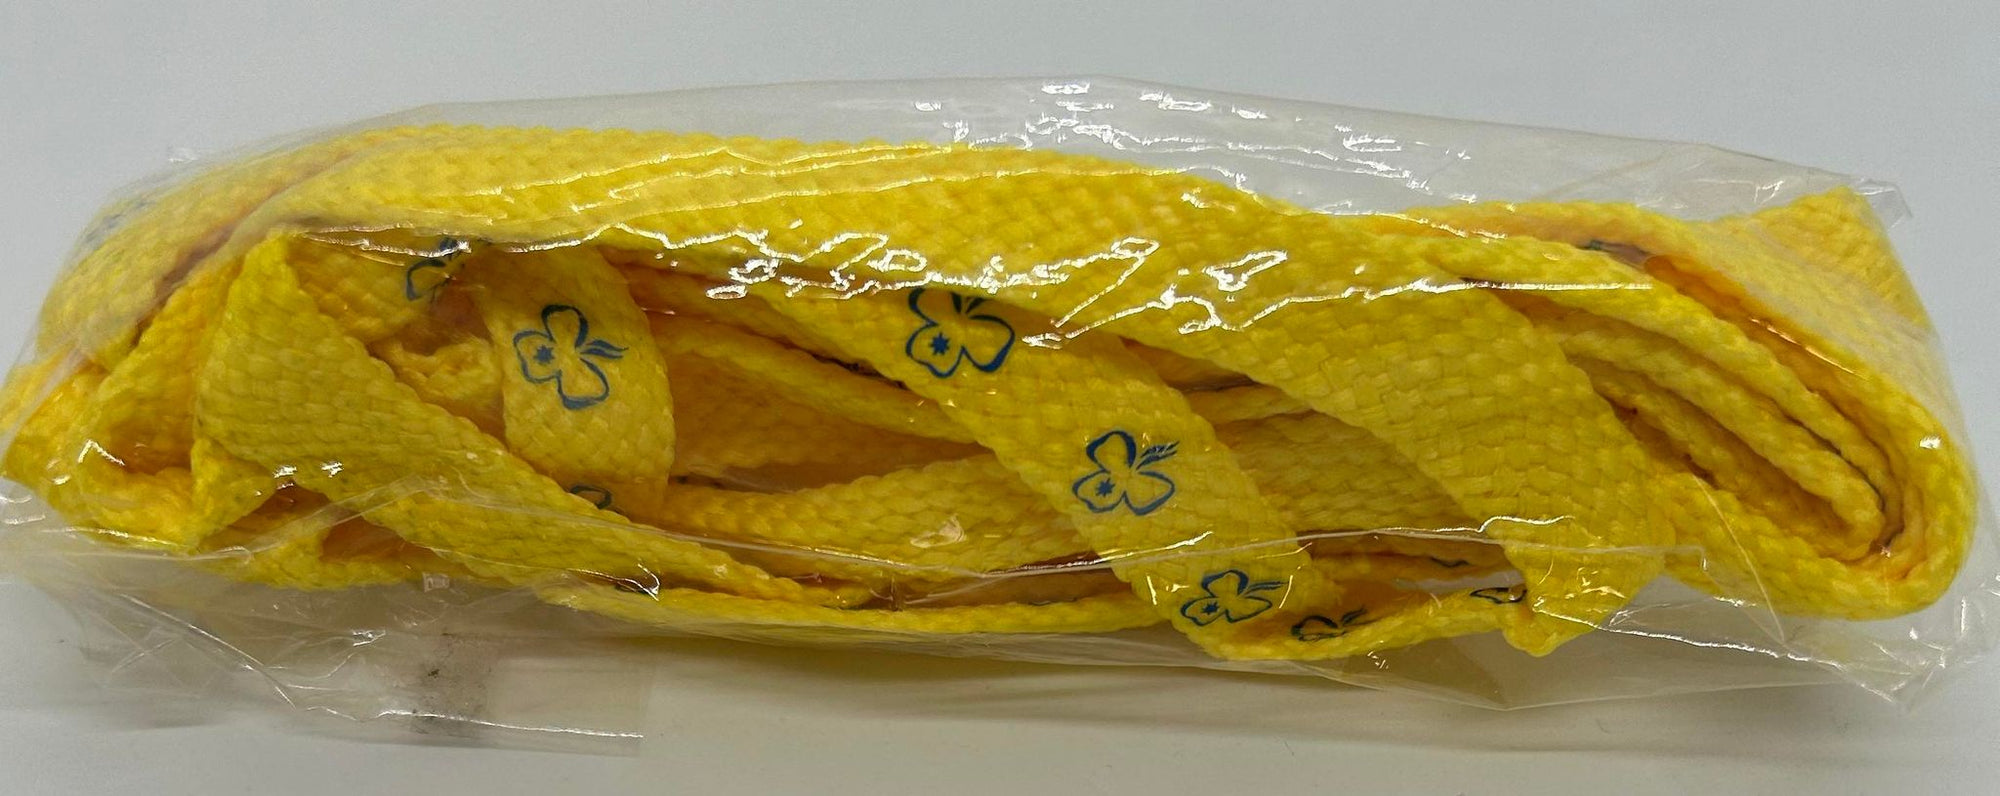 yellow shoelaces with blue trefoils